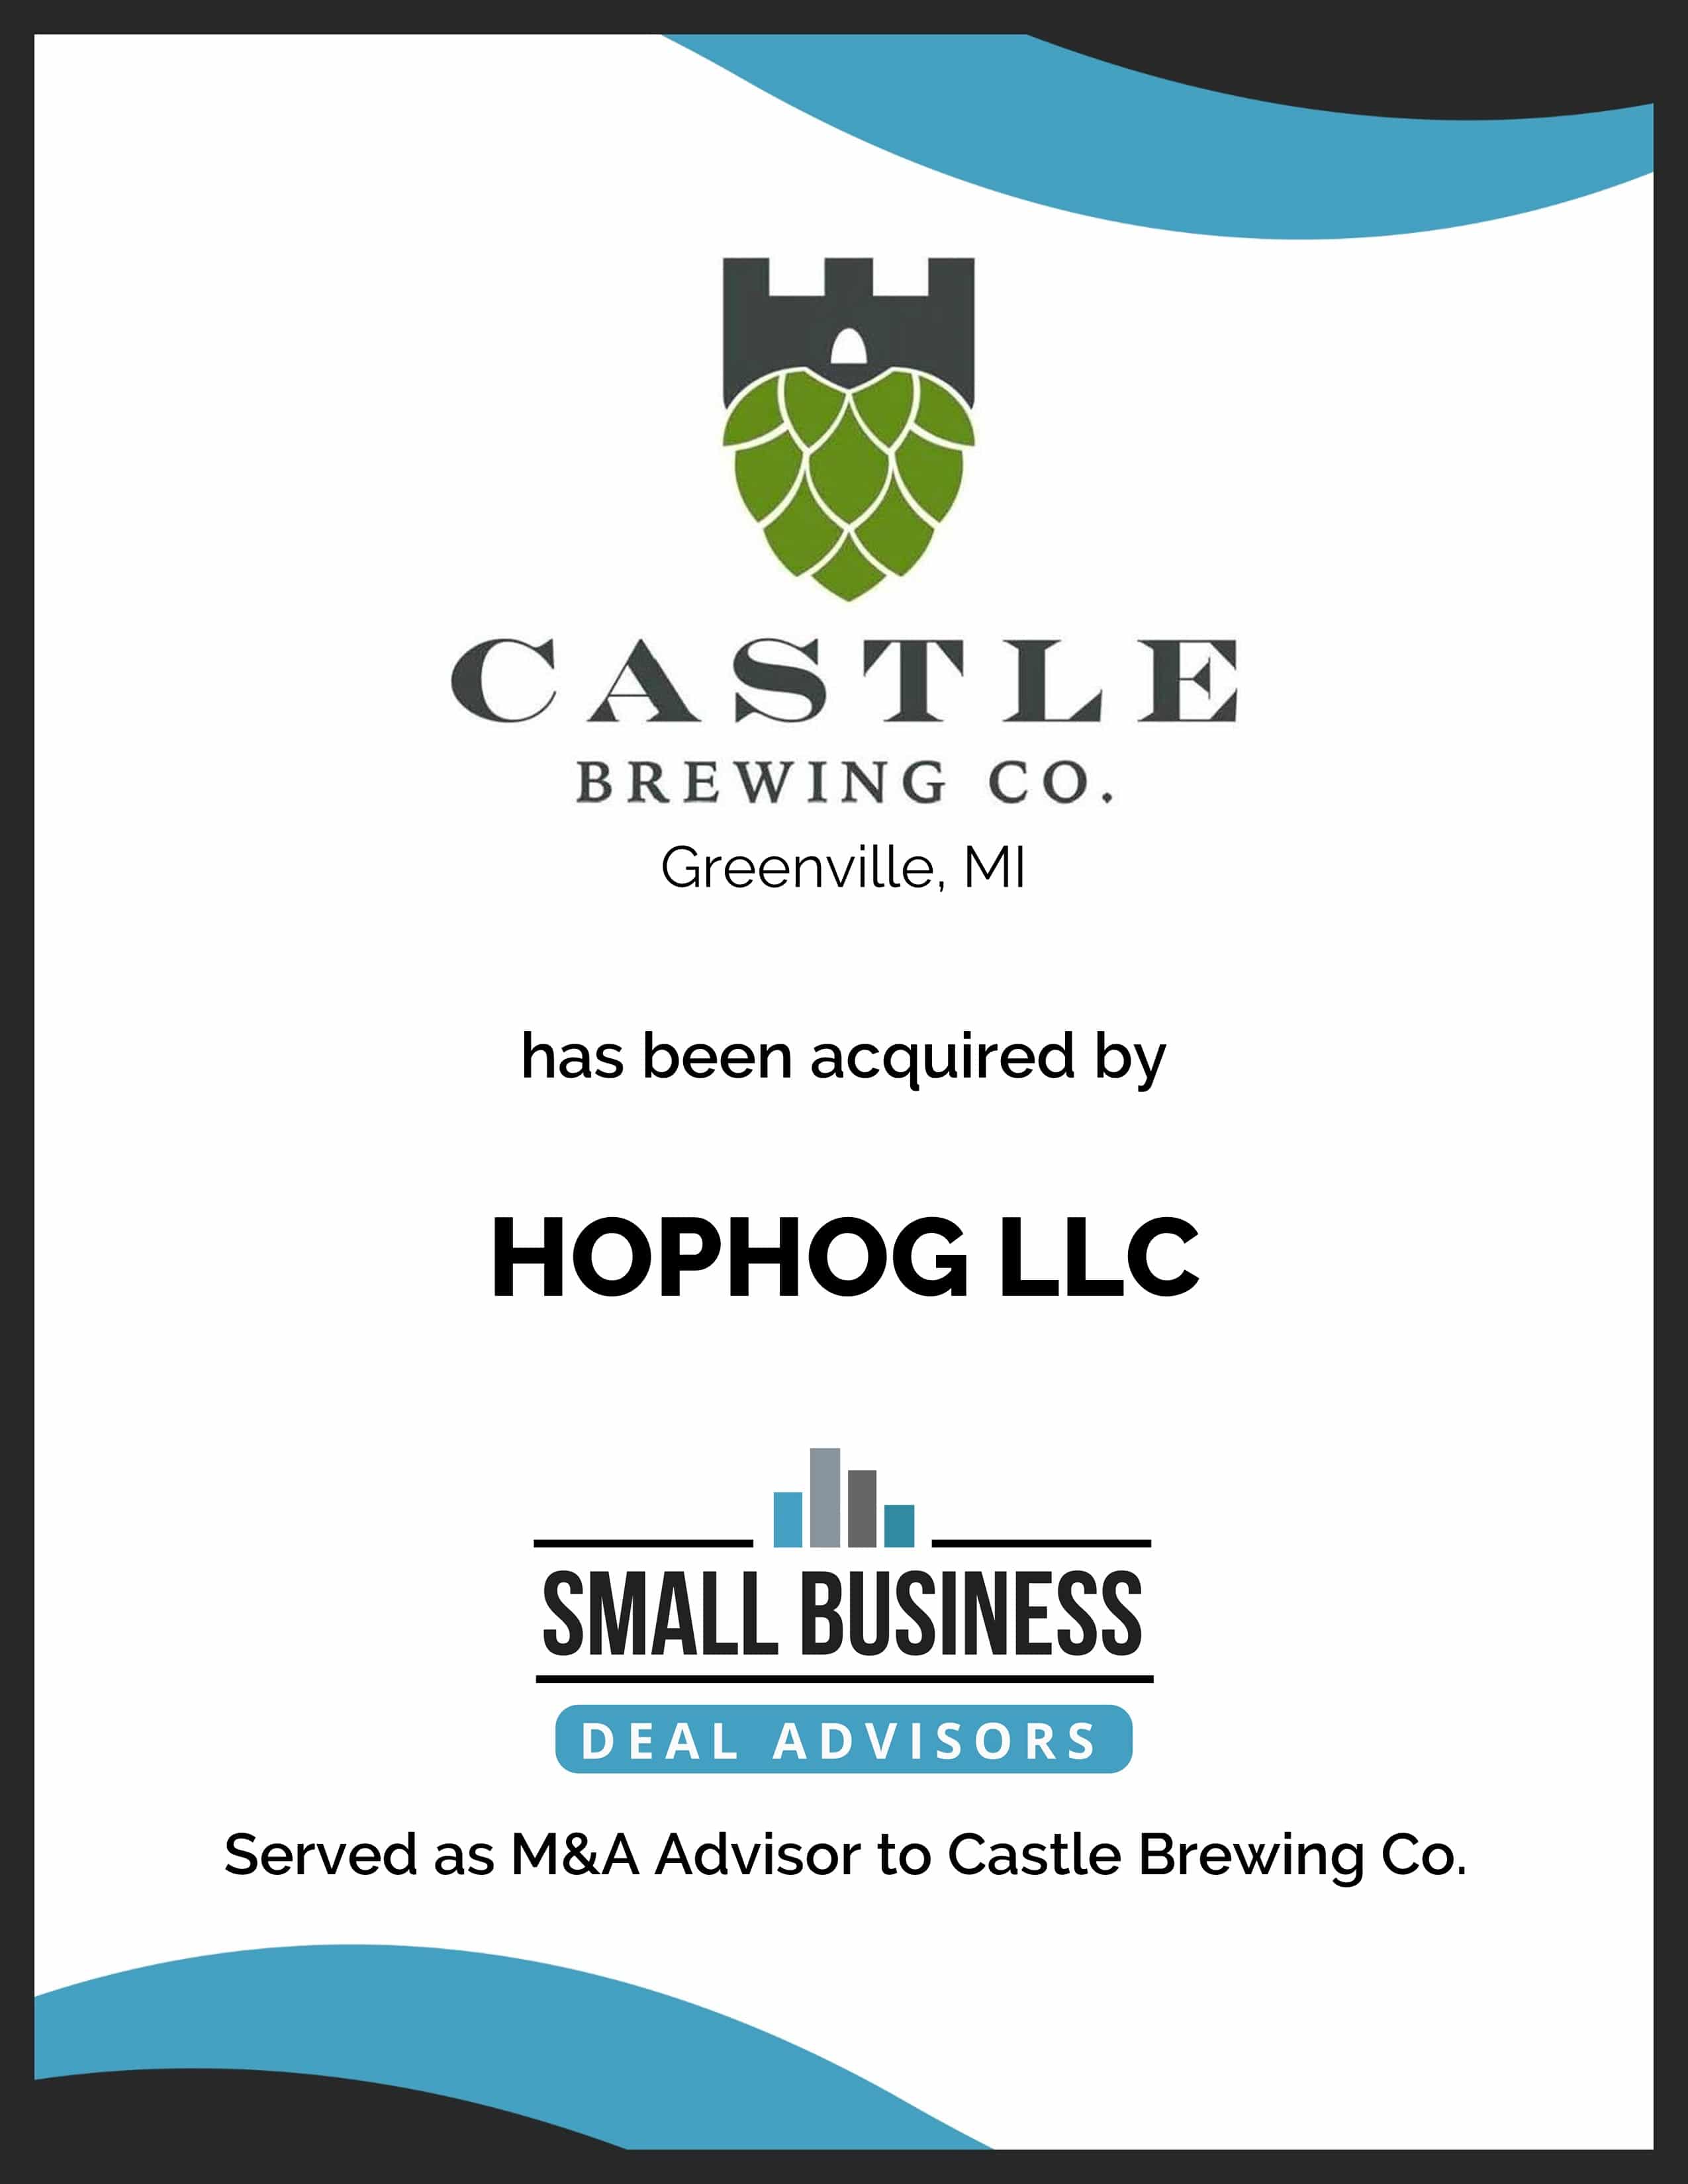 Castle Bewing Co. Acquired by HopHog LLC